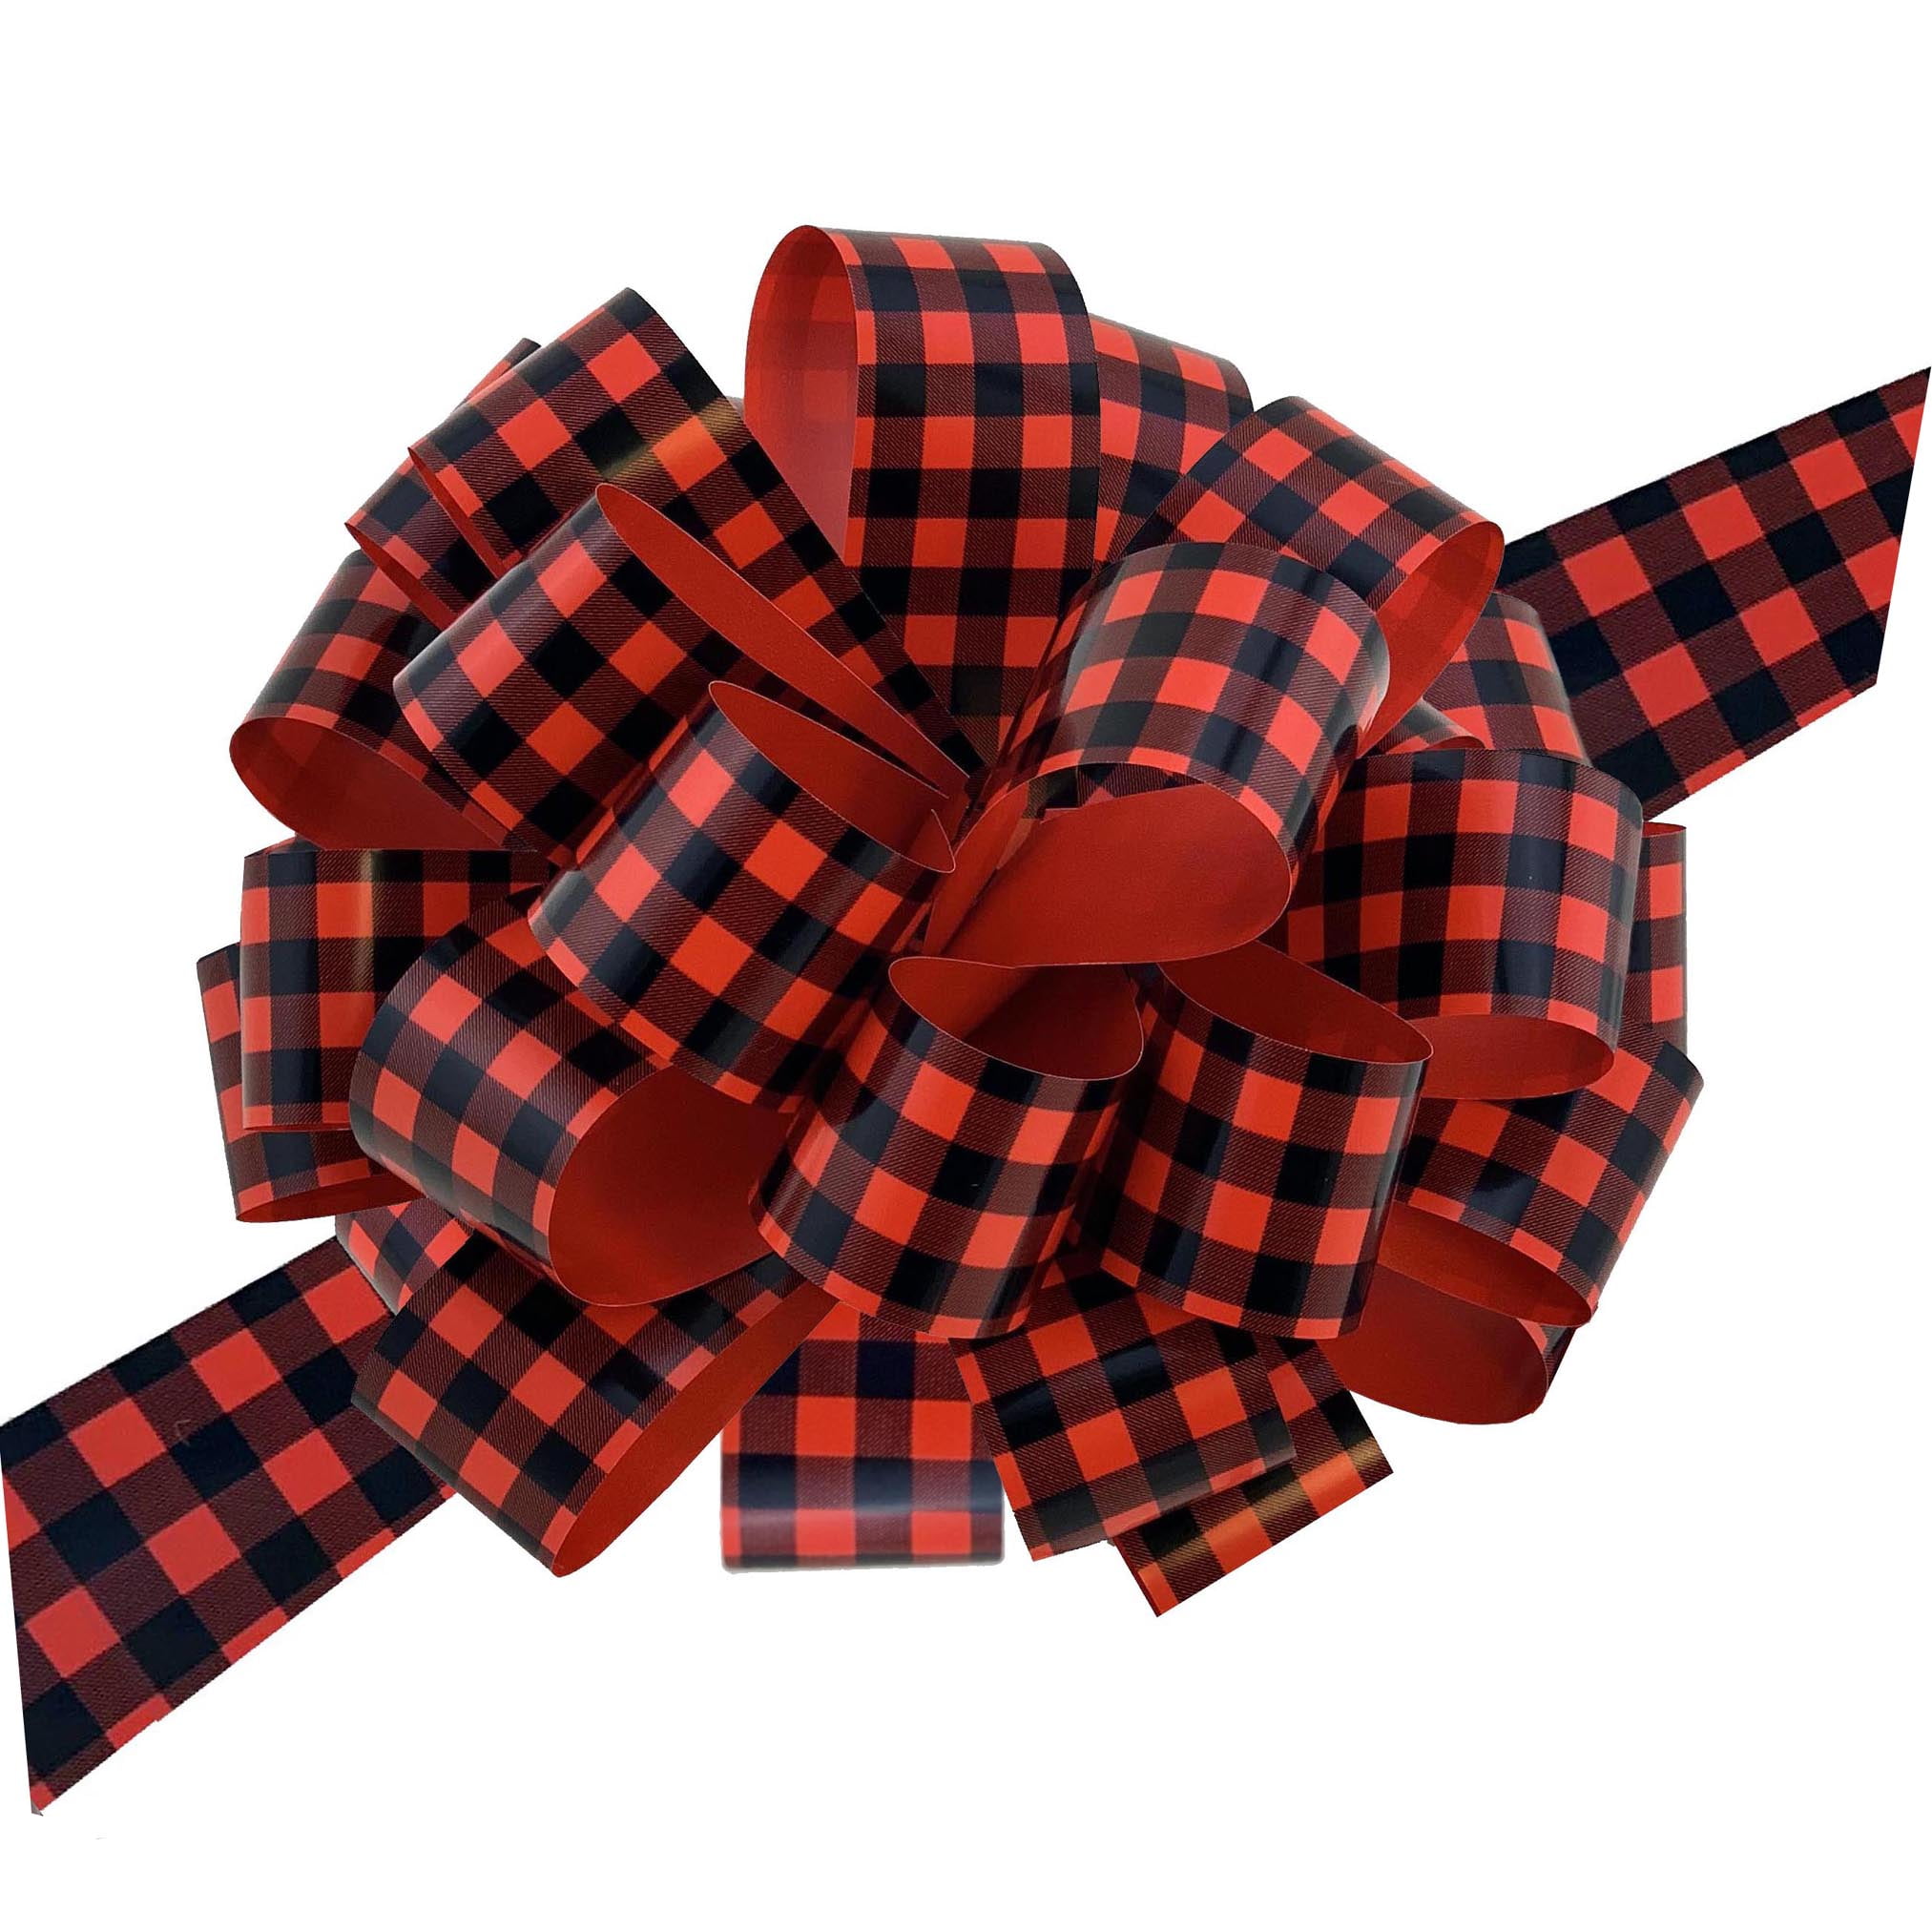 Large Red Ribbon Pull Bows - 9 Wide, Set of 6, Christmas, Big Gift Bows,  Gift Basket, Presents, Wreath, Swag, Garland, Valentine's Day, Fundraiser